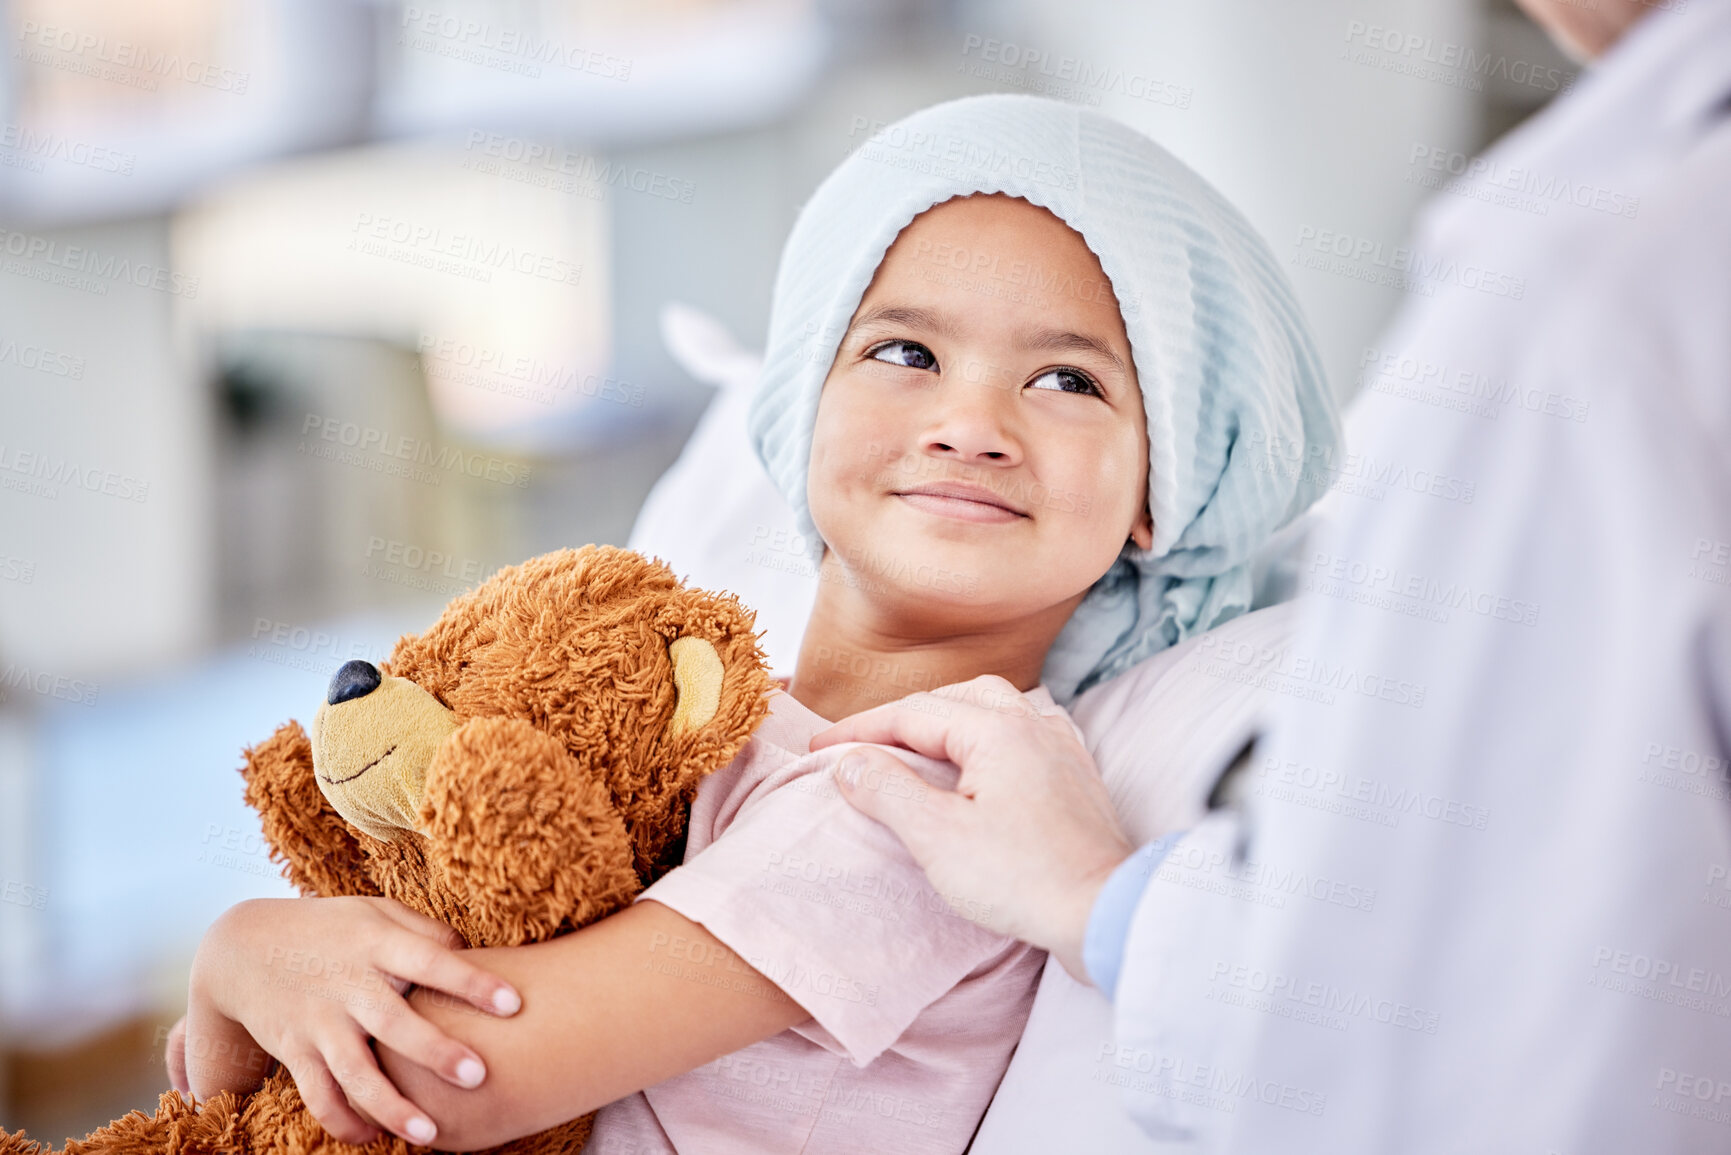 Buy stock photo Cancer patient, child and doctor with support, healthcare service and hand for empathy, love and healing in hospital bed. Happy, sick girl or kid listening to pediatrician or medical person helping